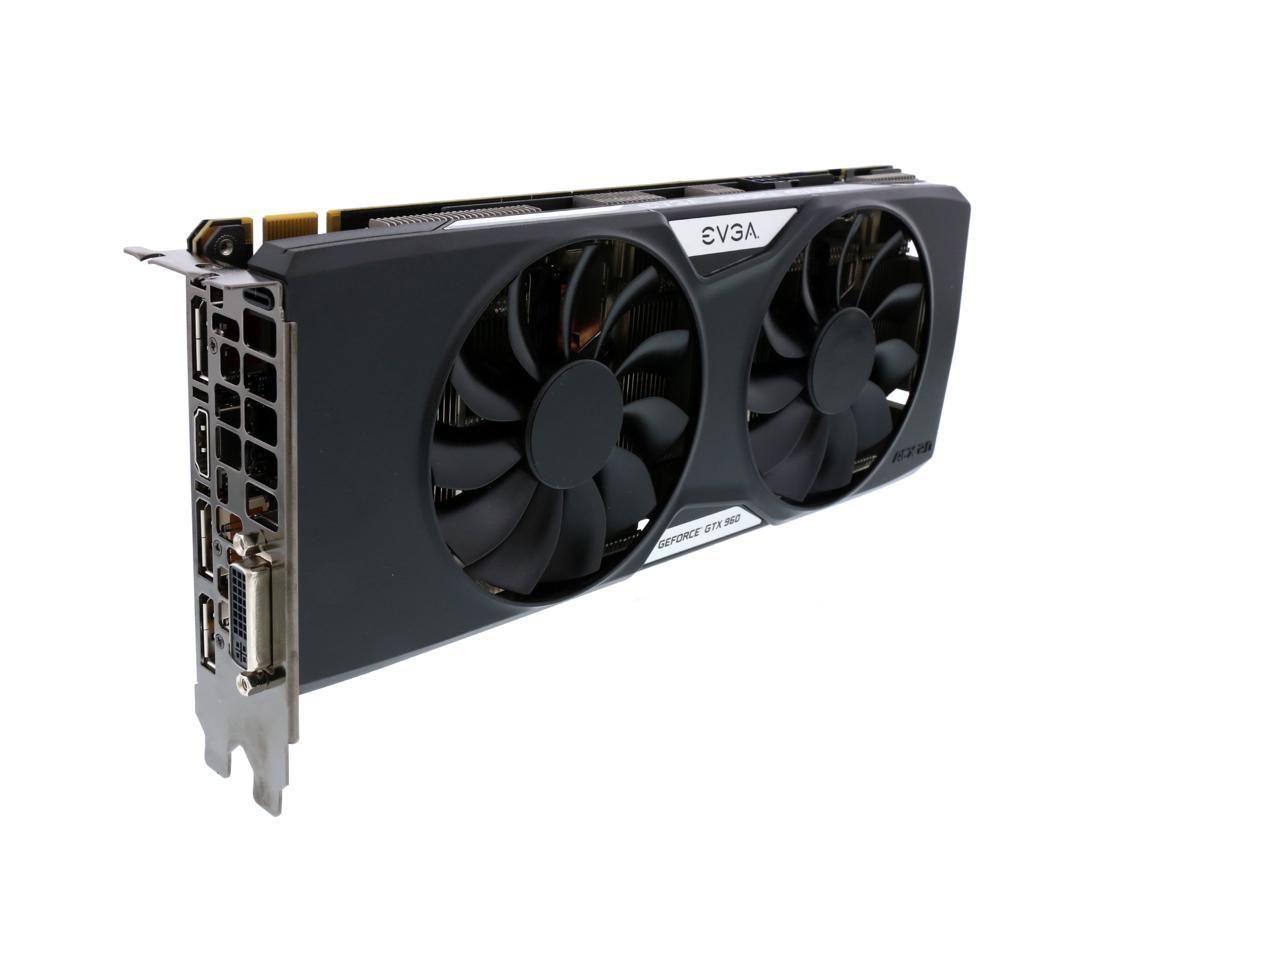 Evga Geforce Gtx 960 04g P4 3966 Kr 4gb Ssc Gaming W Acx 2 0 Whisper Silent Cooling W Free Installed Backplate Graphics Card Newegg Com